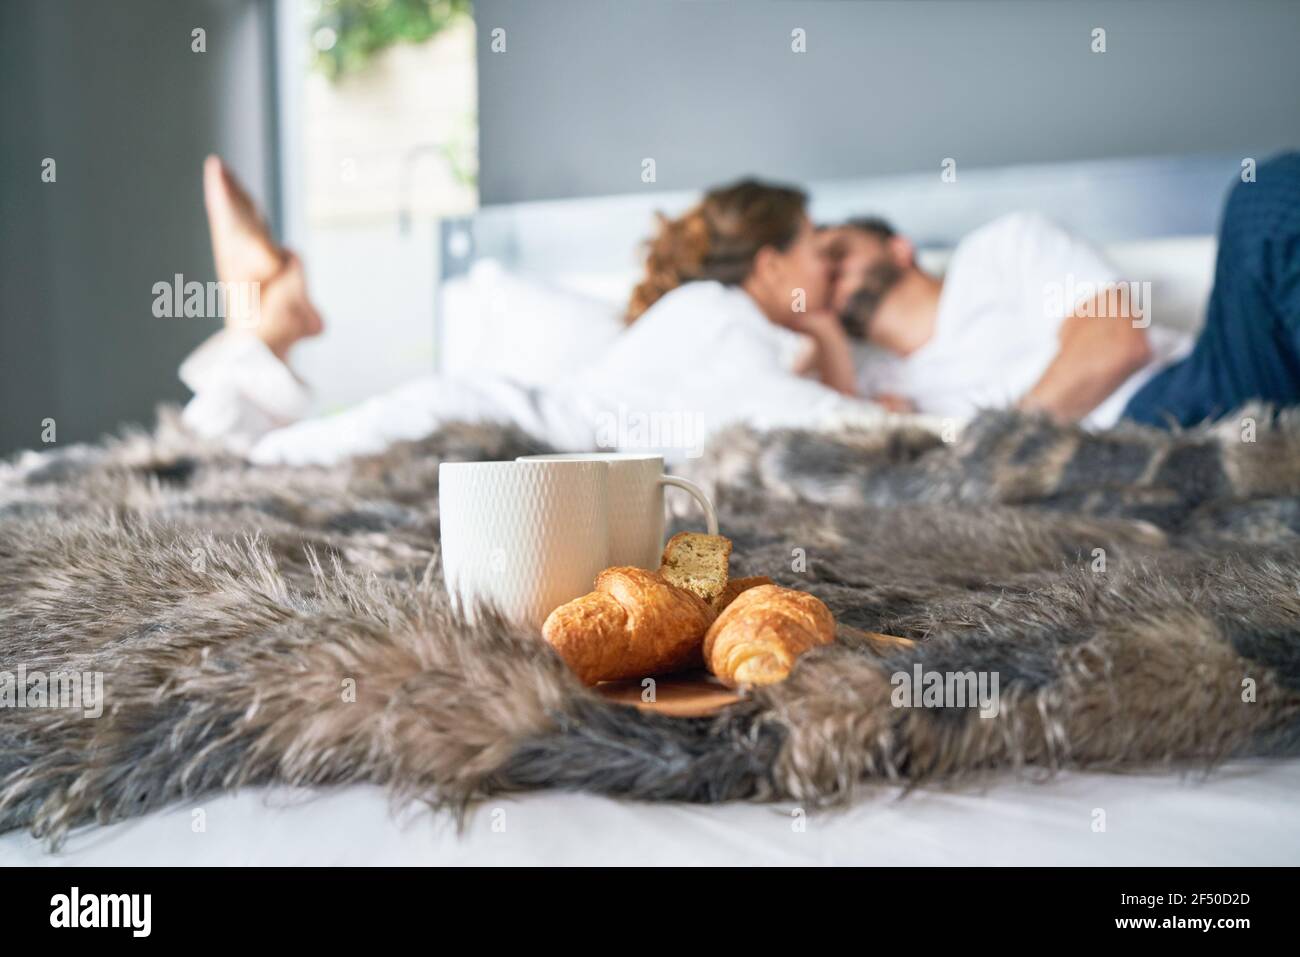 Affectionate couple kissing on bed behind croissant and coffee cup Stock Photo